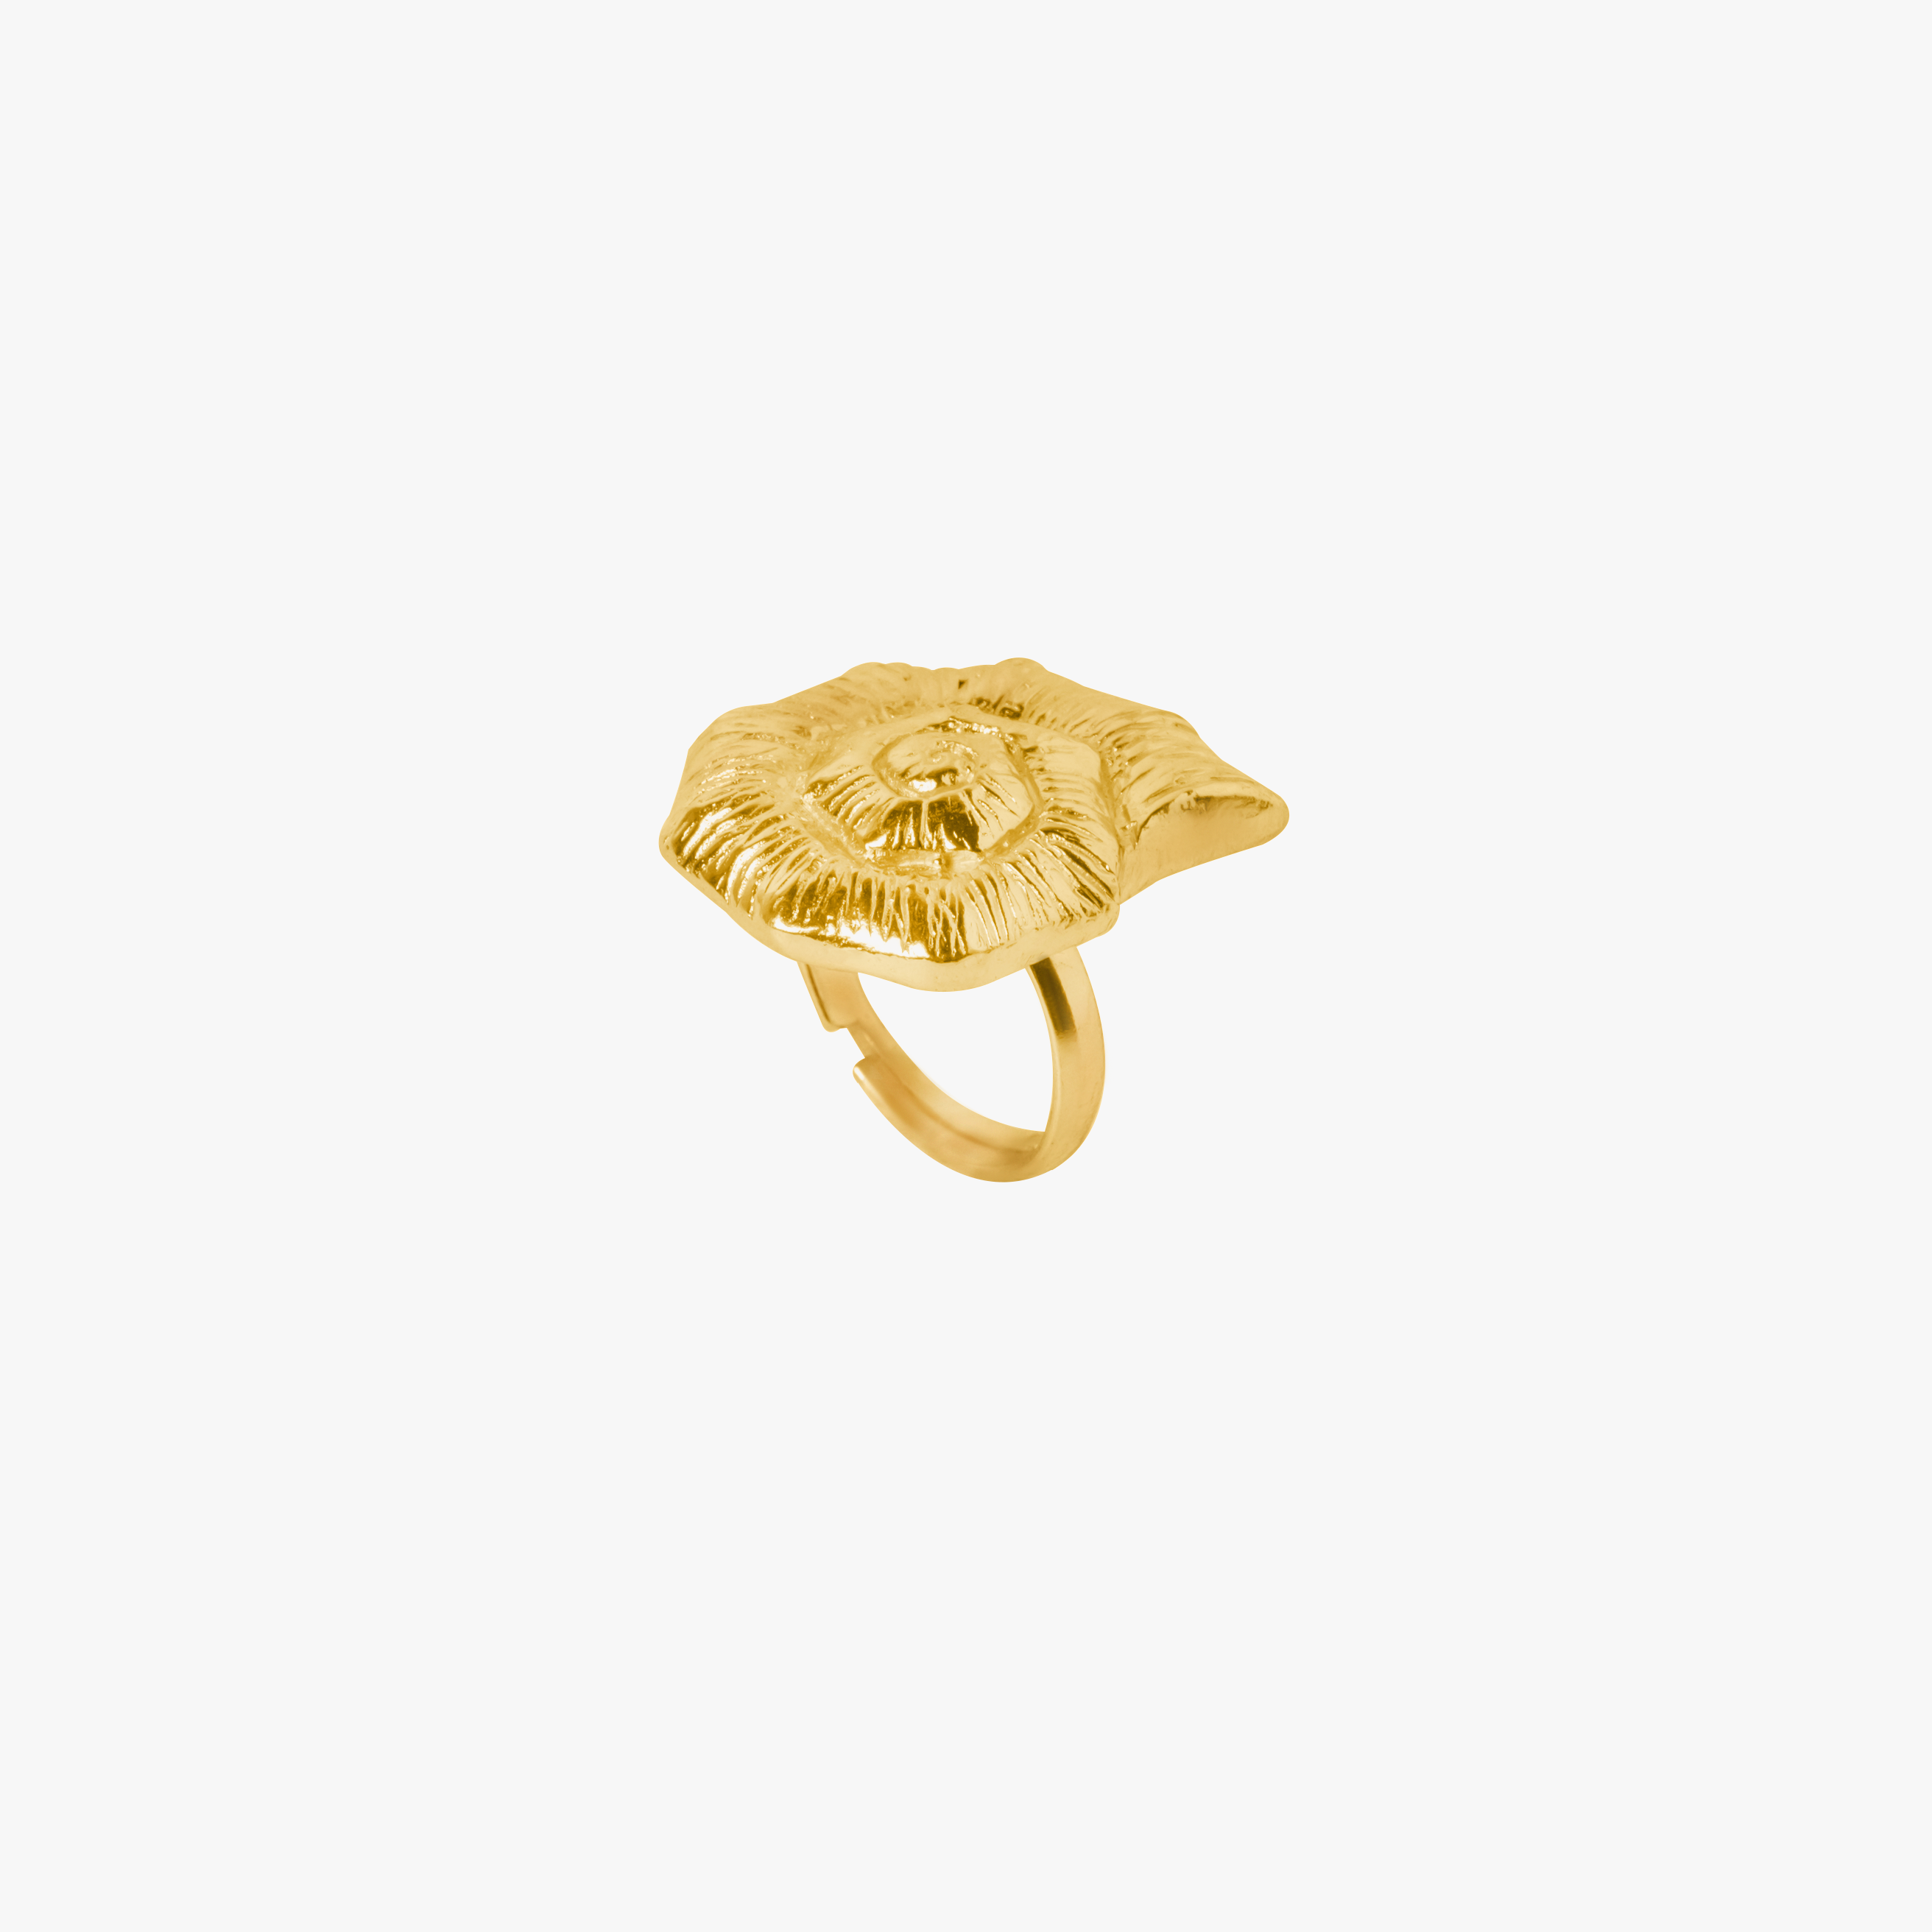 KNOBBED WHELK RING GOLD TONE , a product by Equiivalence